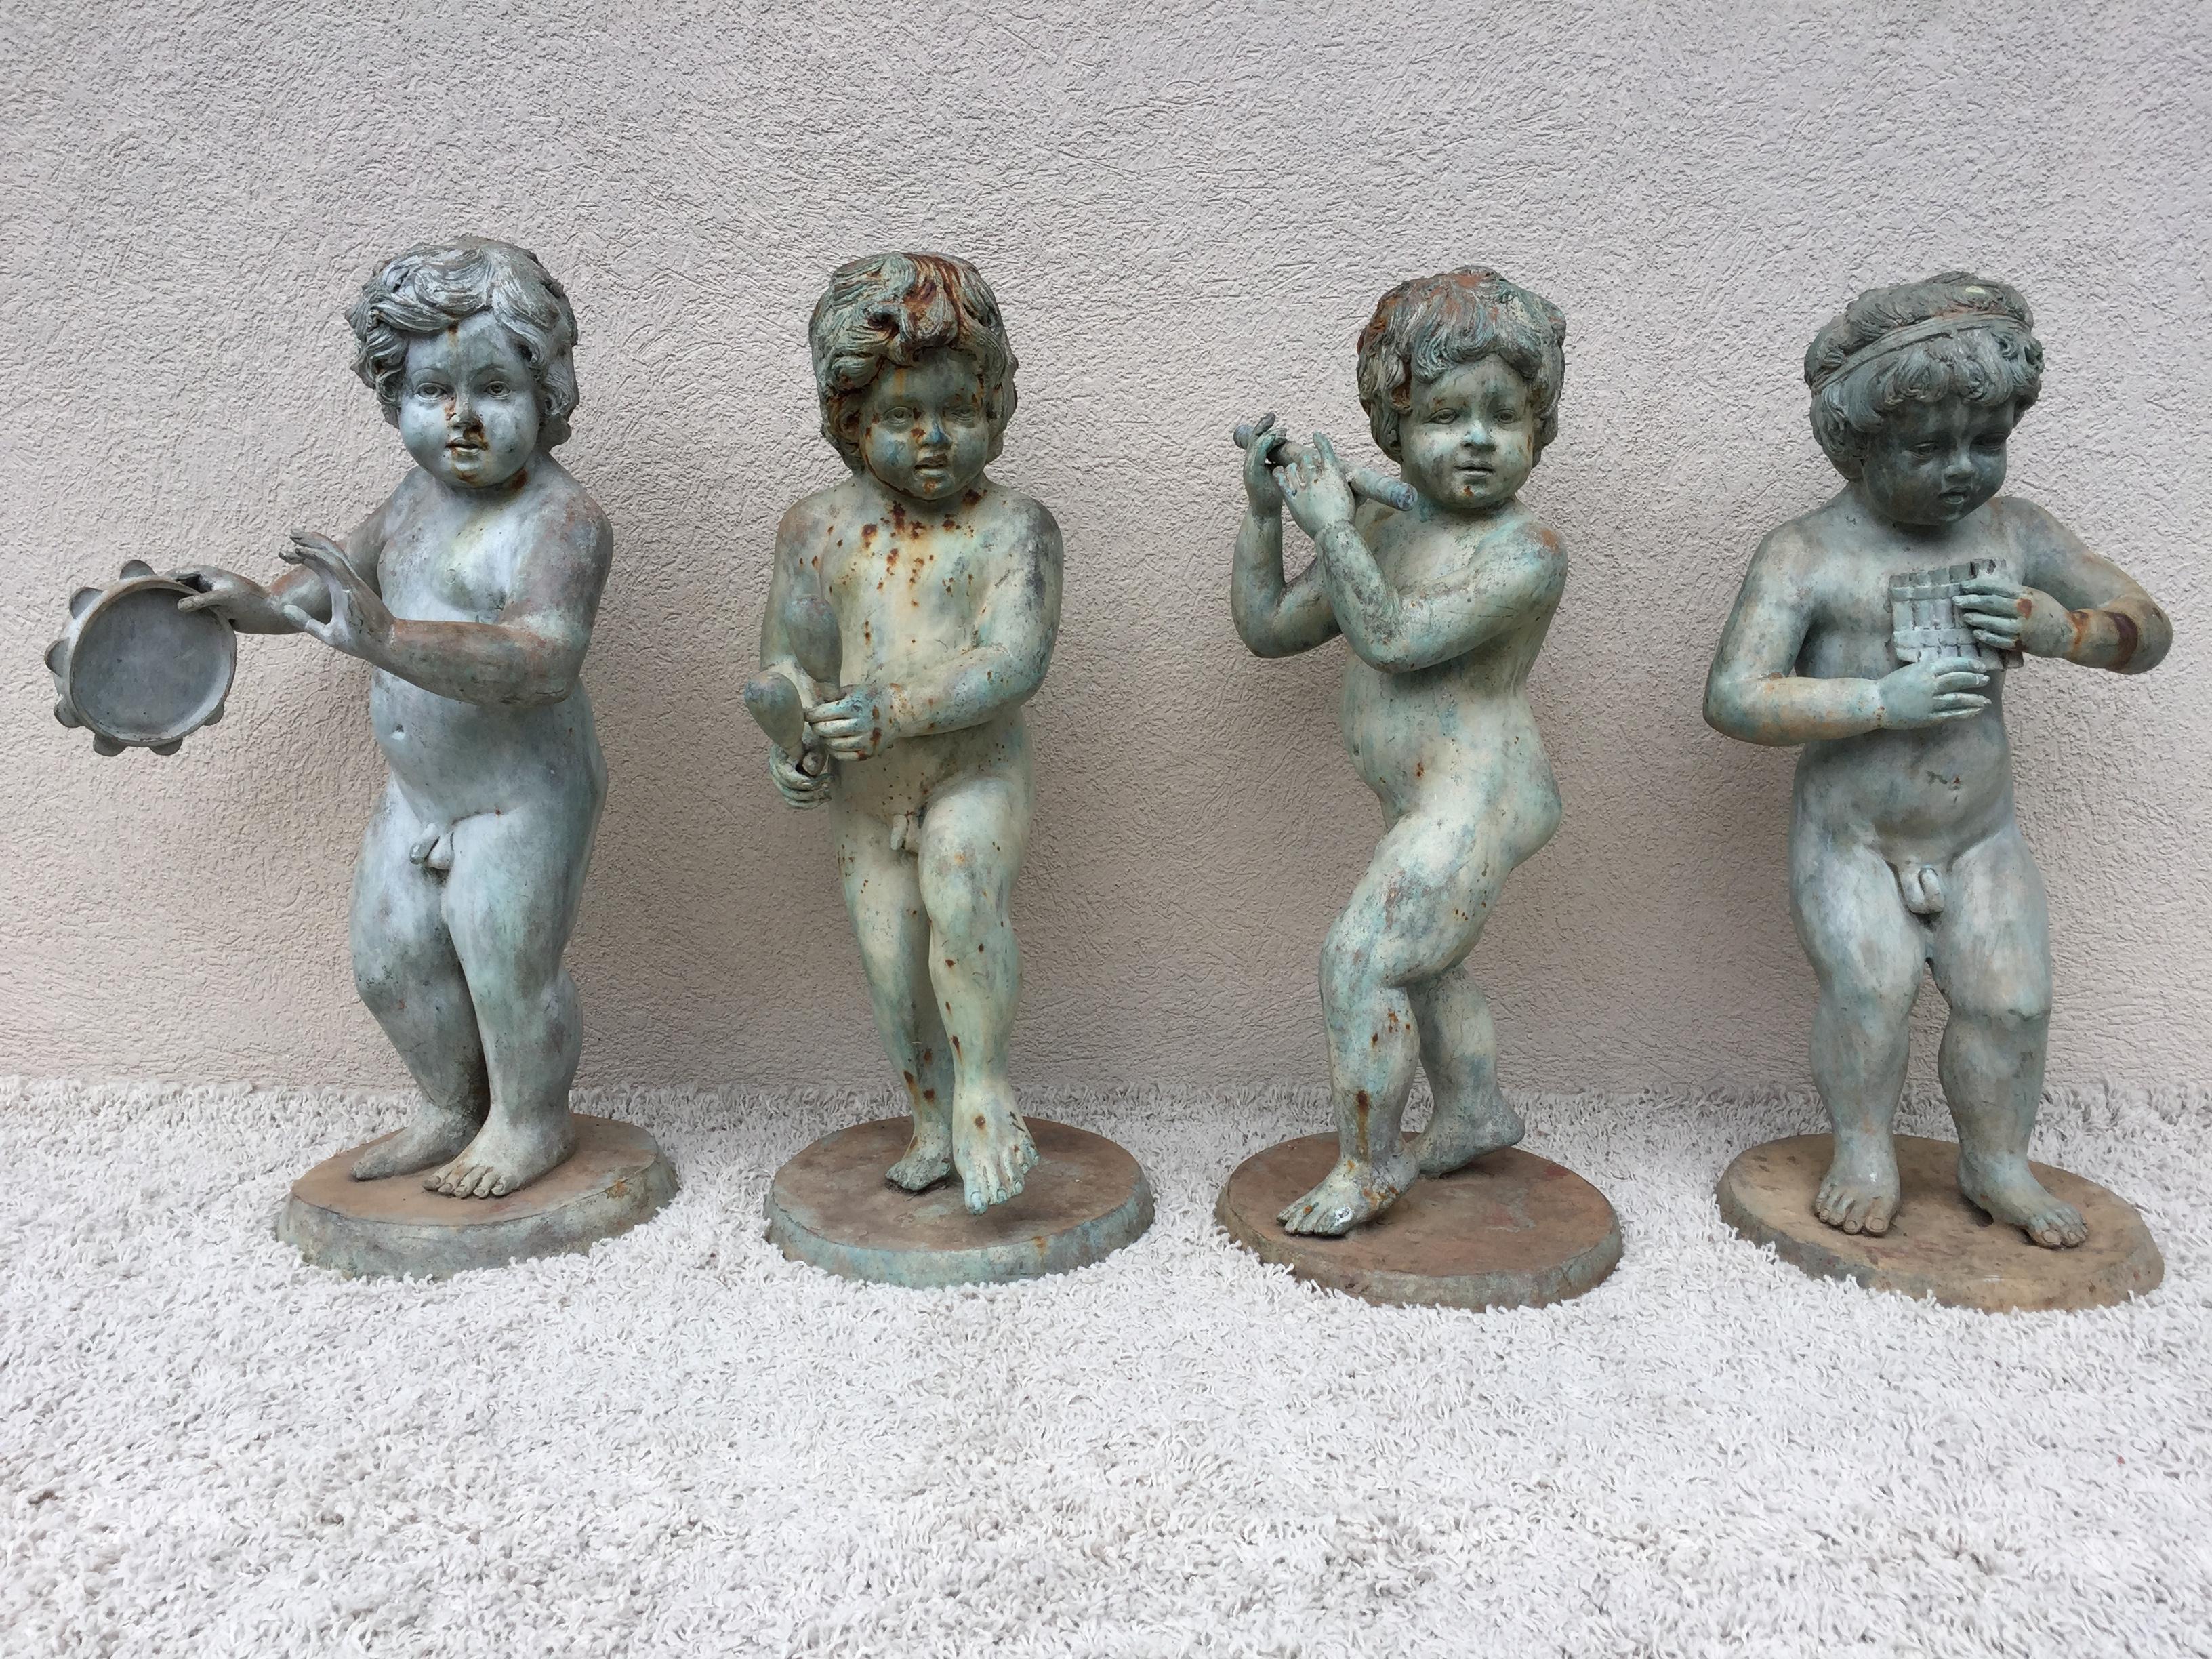 Bronze musical Putti or Cherub garden statues set of four, with original patina, whimsical classical 1930s. Measurement of 13 equals the base, they are 17-18 diameter.